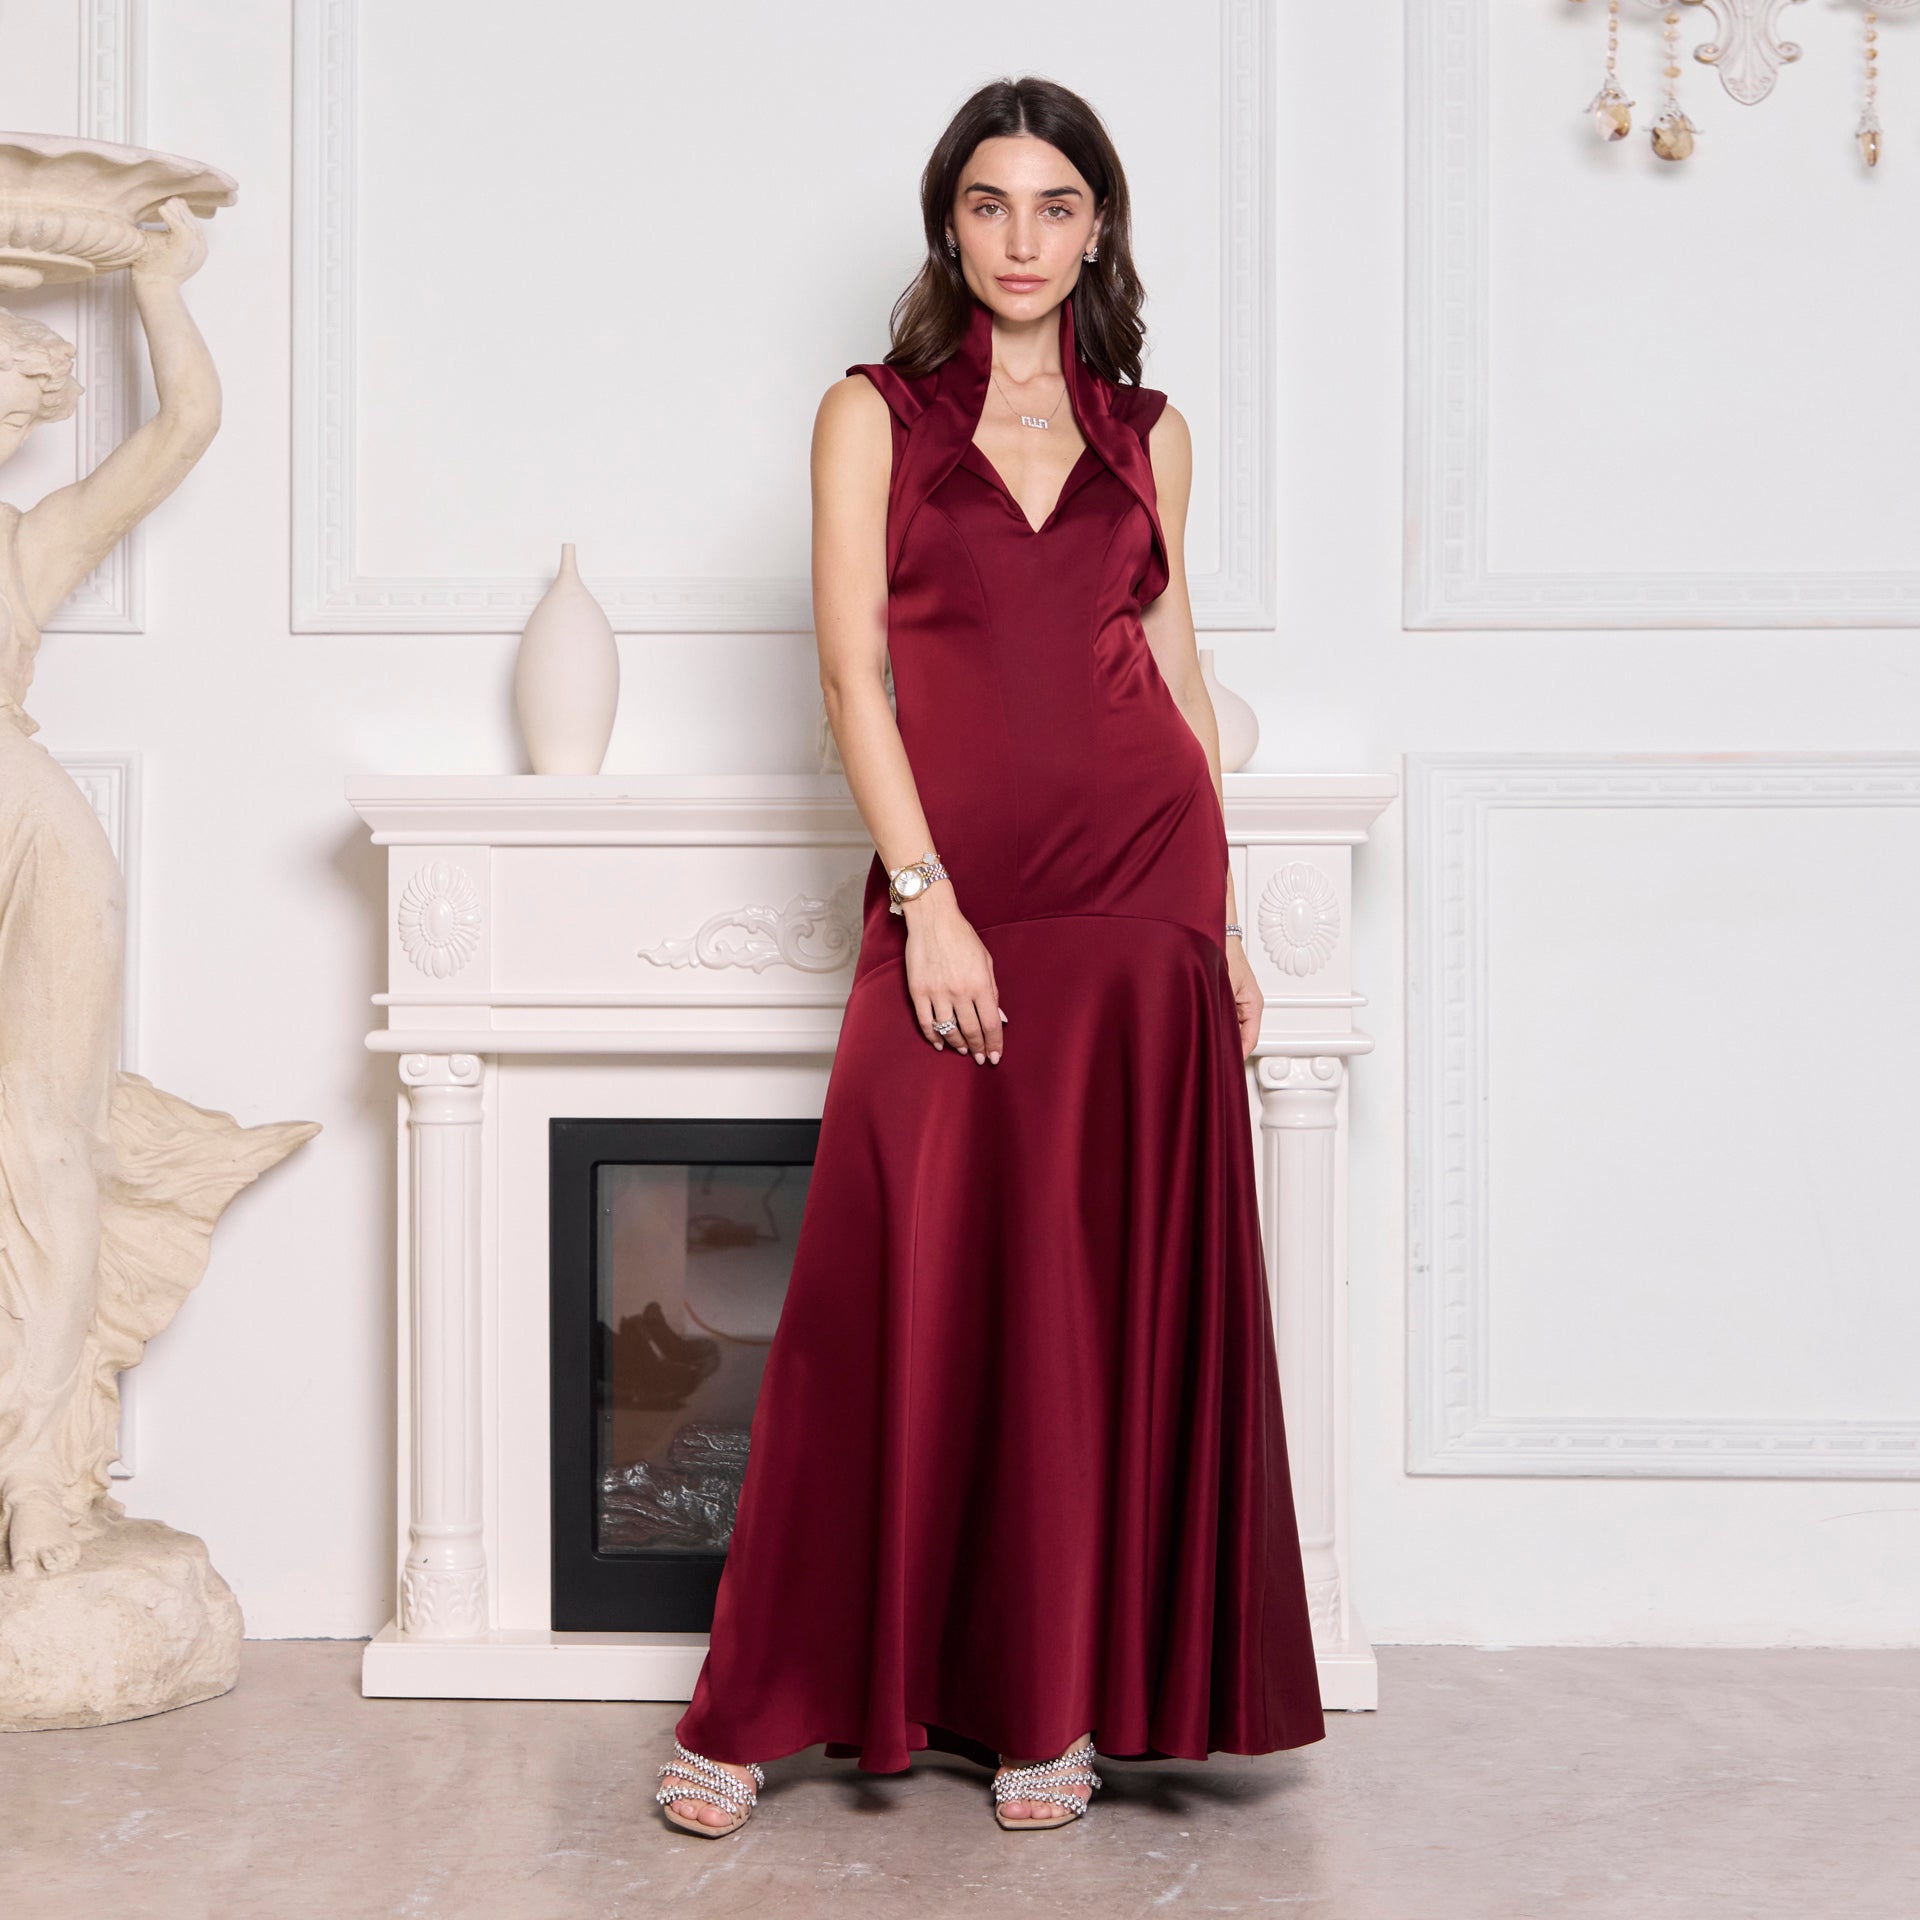 Maroon Satin Crepe Dress With Wide Skirt By Armoire